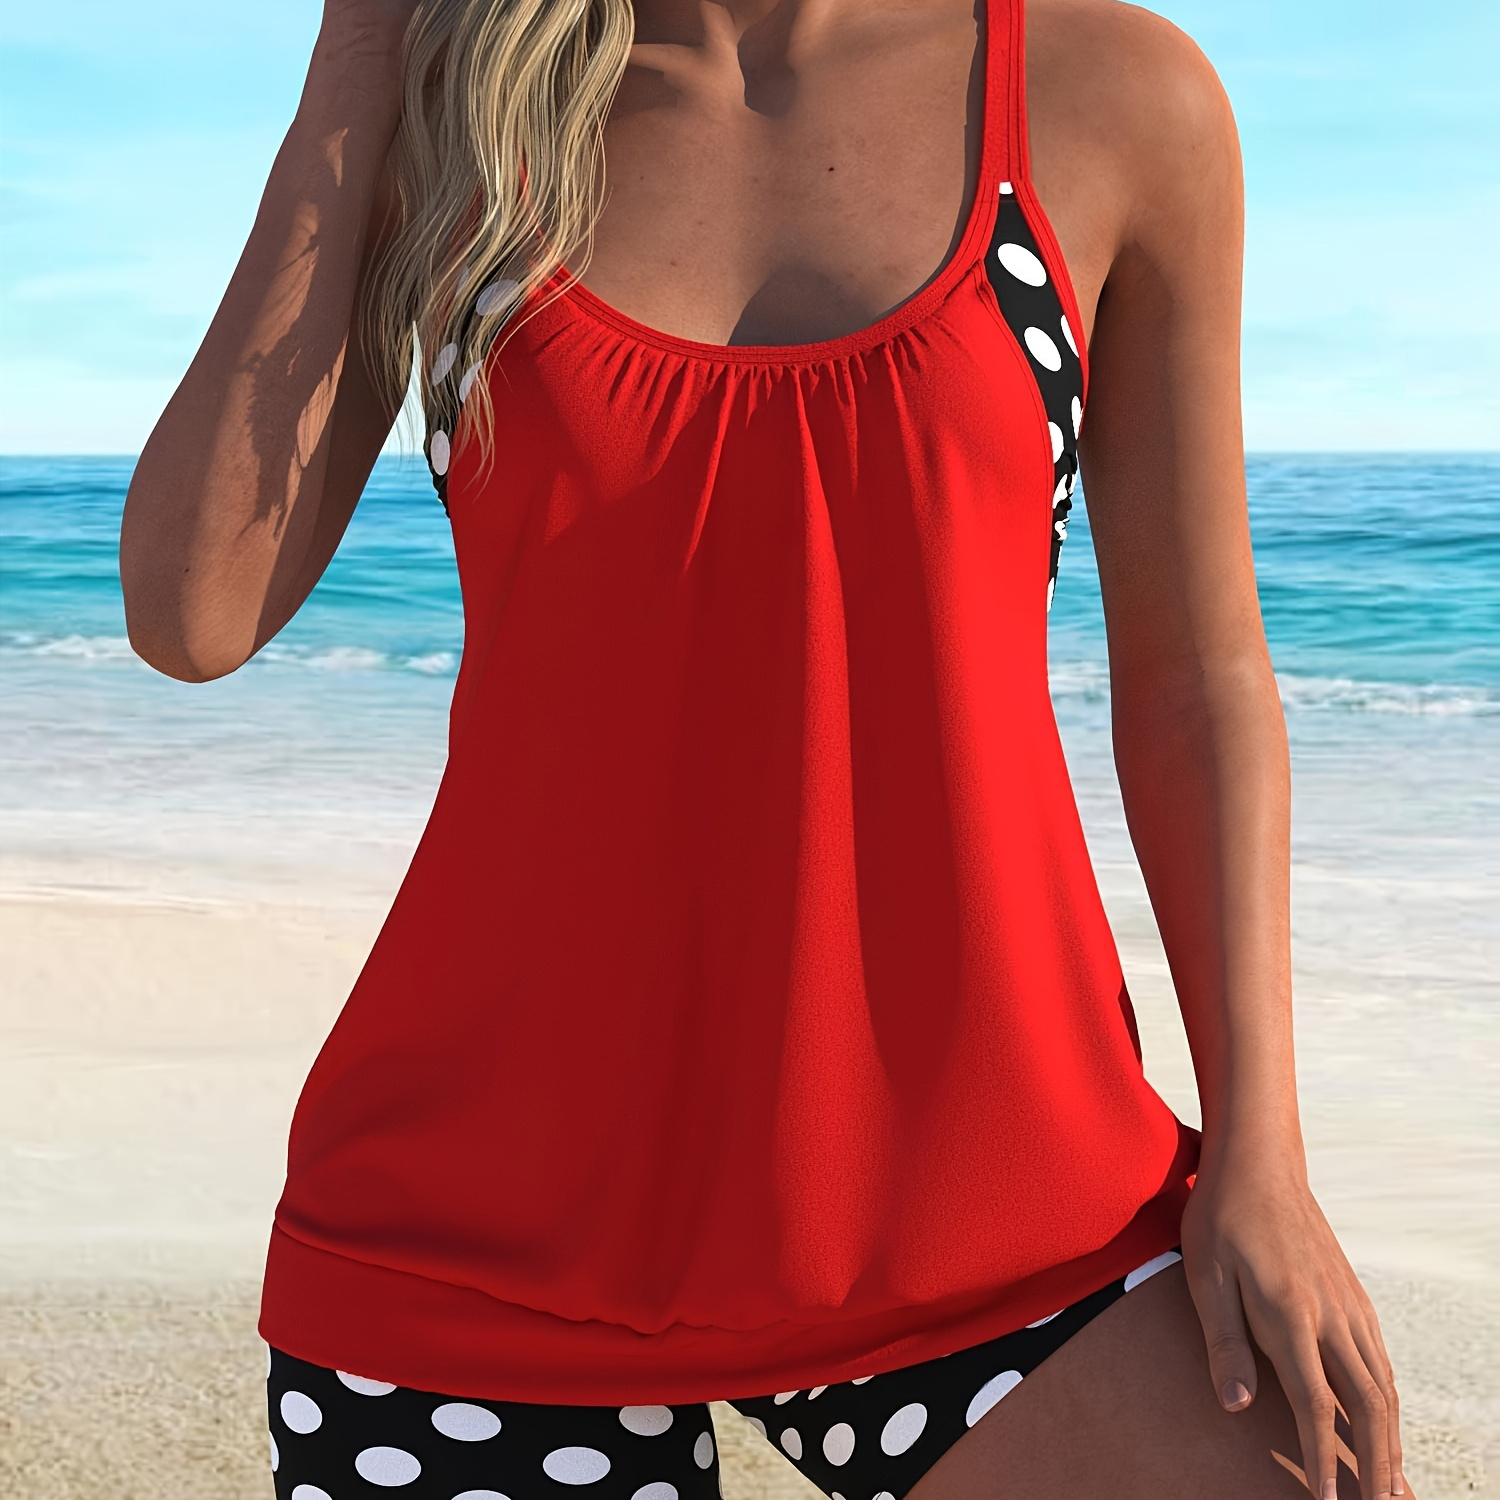 

Polka Dot Print Hollow Out Red 2 Piece Set Tankini, Scoop Neck Medium Stretchy Flattering Swimsuits, Women's Swimwear & Clothing Valentine's Day